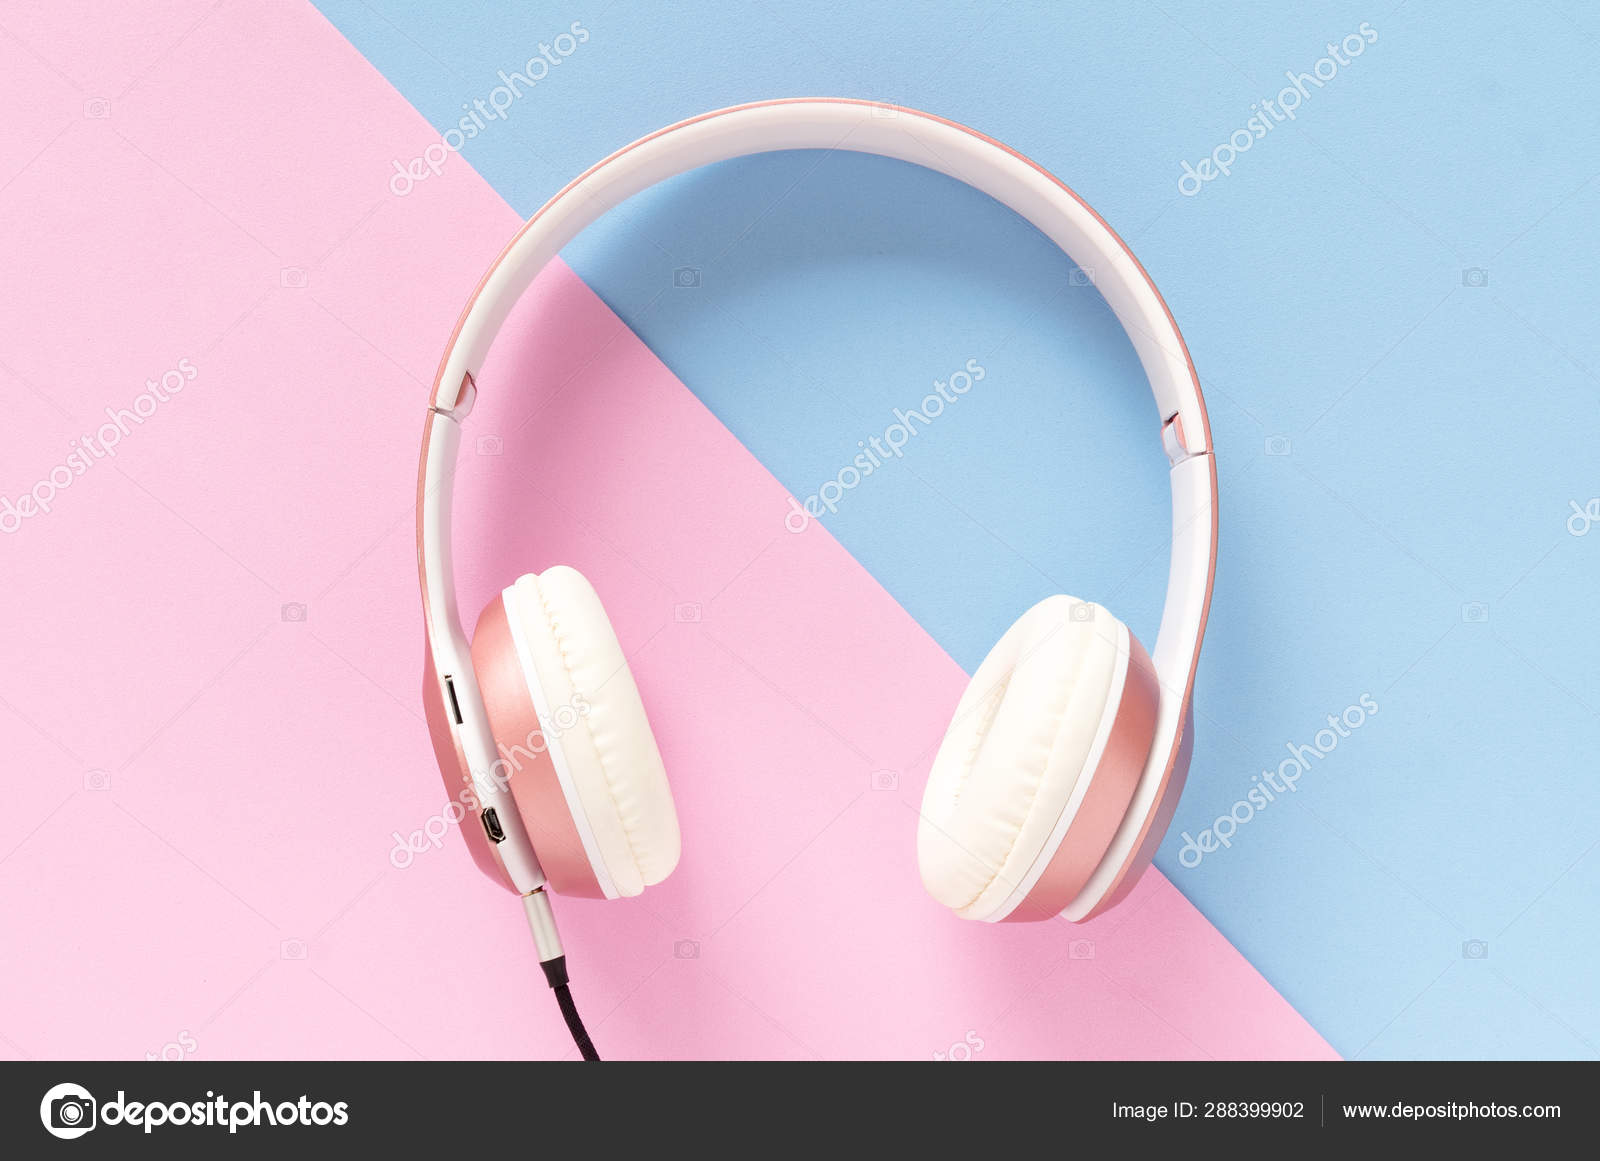 Pink headphone and black cable on pastel color blue and pink background.  Music concept. Stock Photo by ©noomubon 288399902